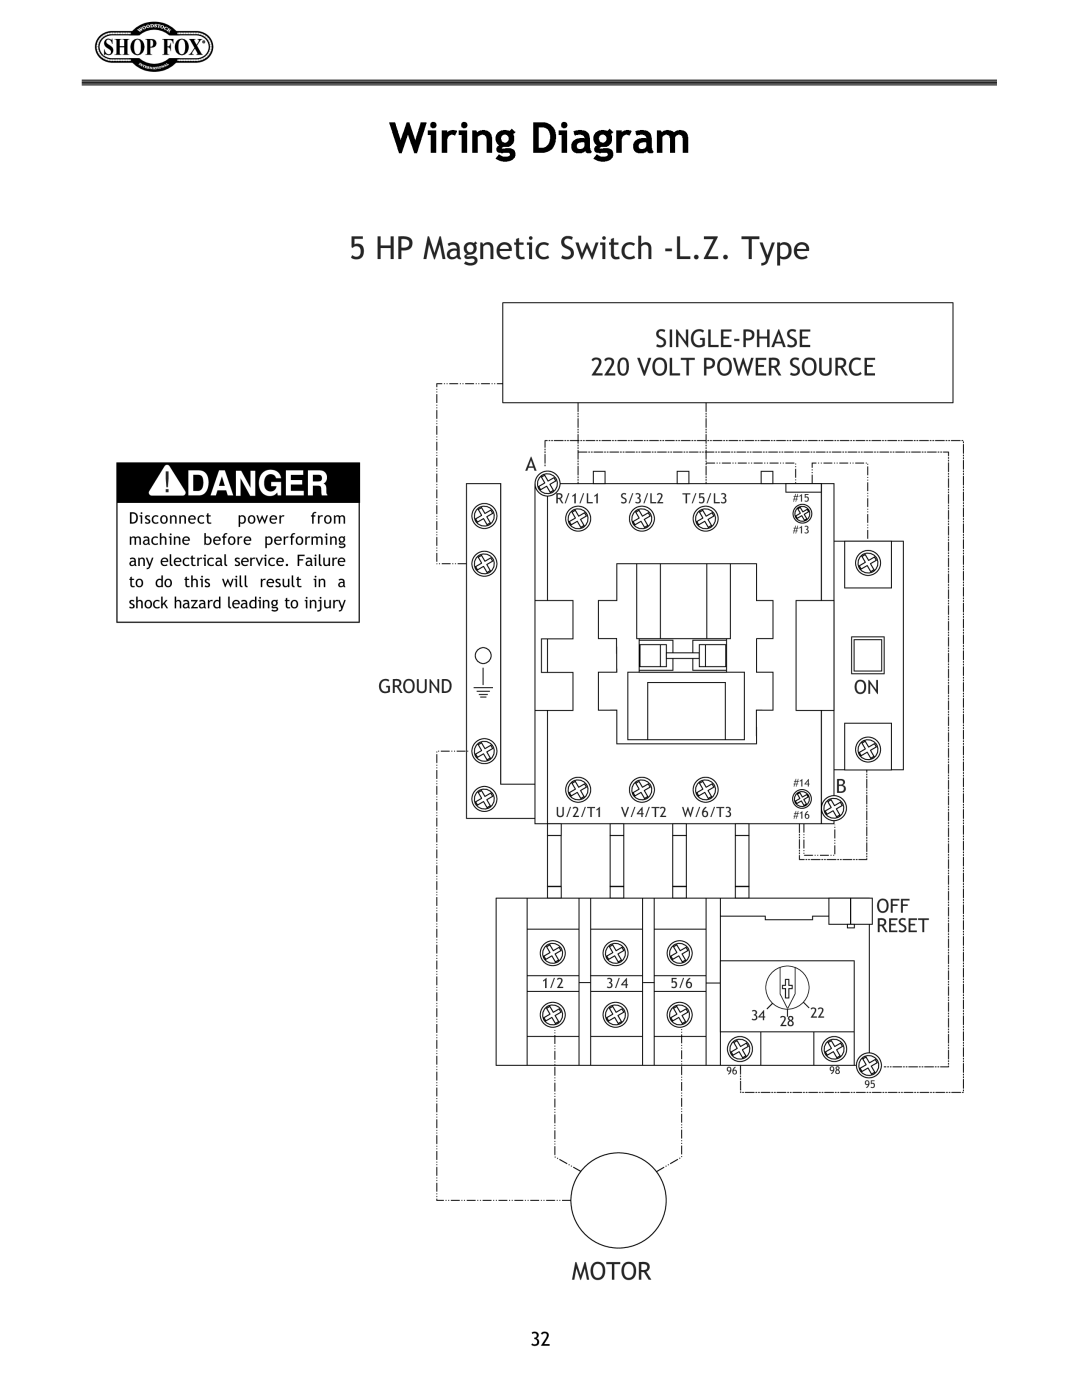 Woodstock W1683 Wiring Diagram, HP Magnetic Switch -L.Z. Type, SINGLE-PHASE 220 VOLT POWER SOURCE, Motor, Reset, #14 B 